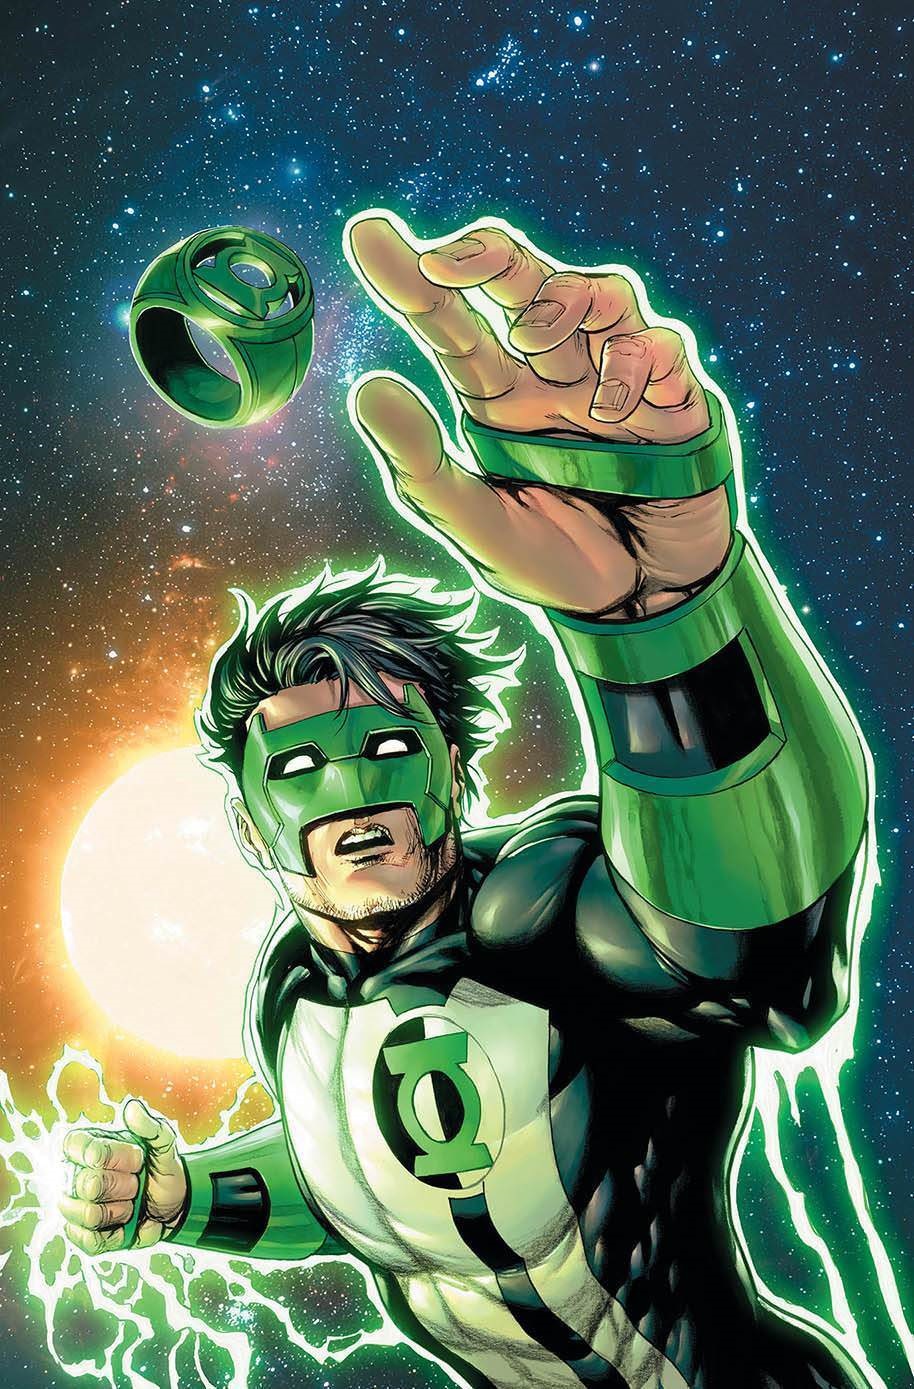 Green Lantern Kyle Rayner reaches for a green power ring in the depths of outer space. He dons a green mask with his black, white, and green uniform. His own ring glows with power. 